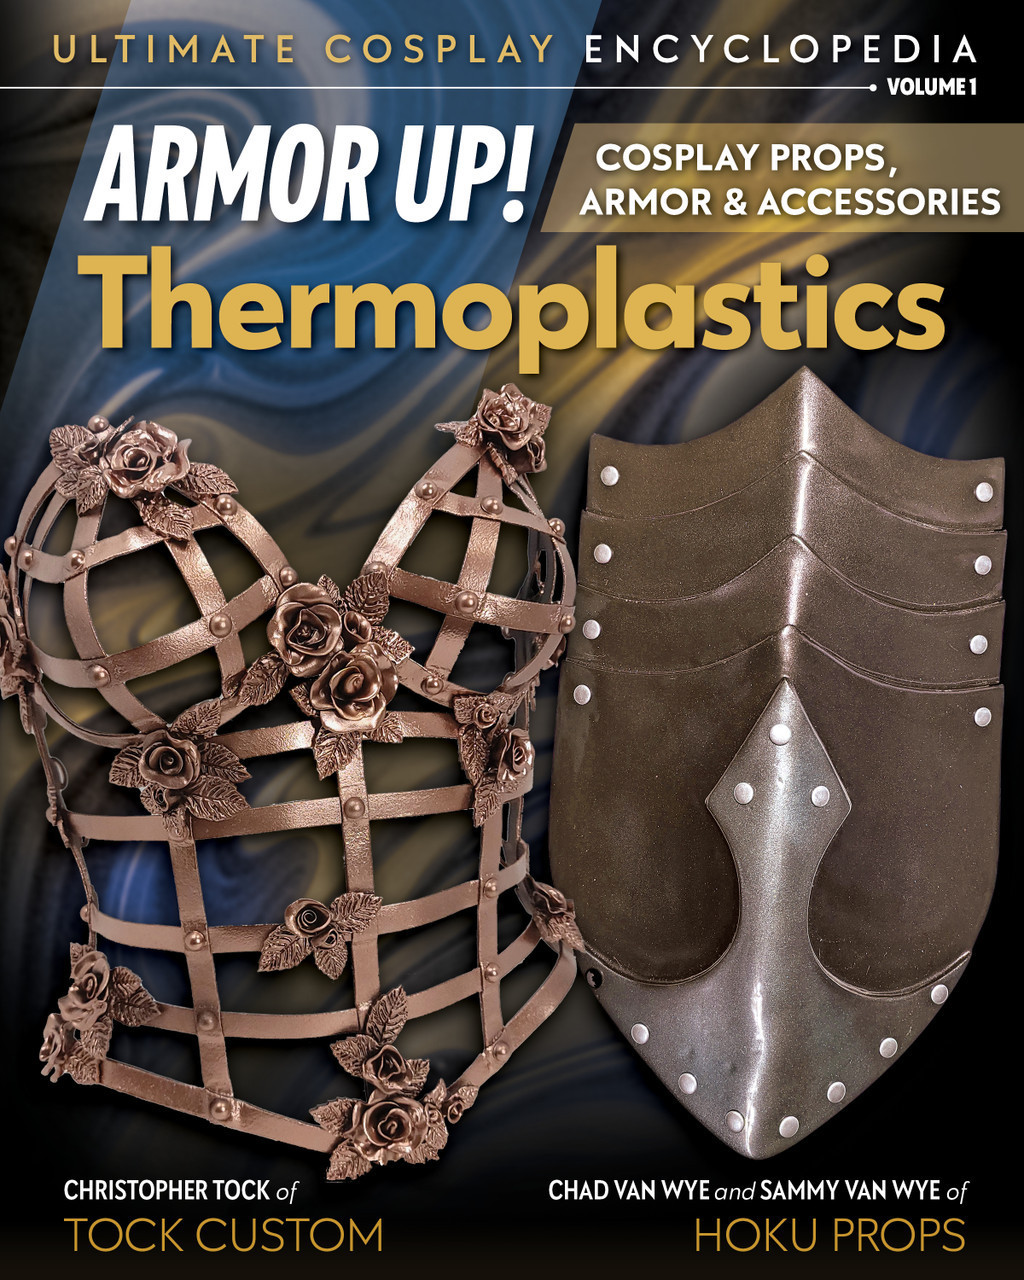 Foam Buying Guide for Cosplay Armor - Andrew Makes Things